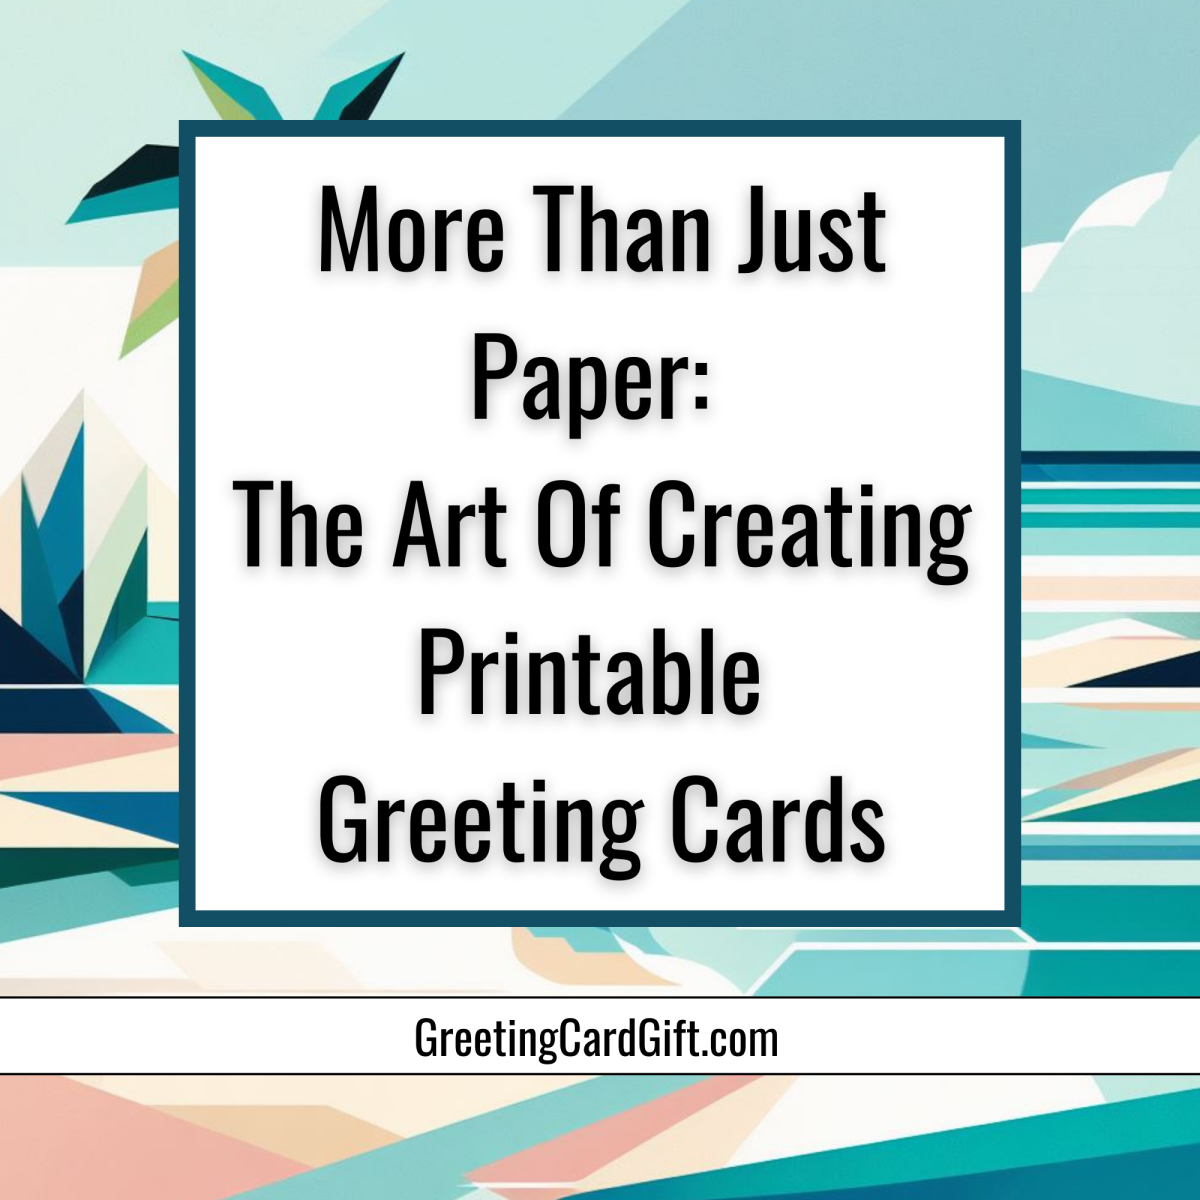 More Than Just Paper: The Art Of Creating Printable Greeting Cards